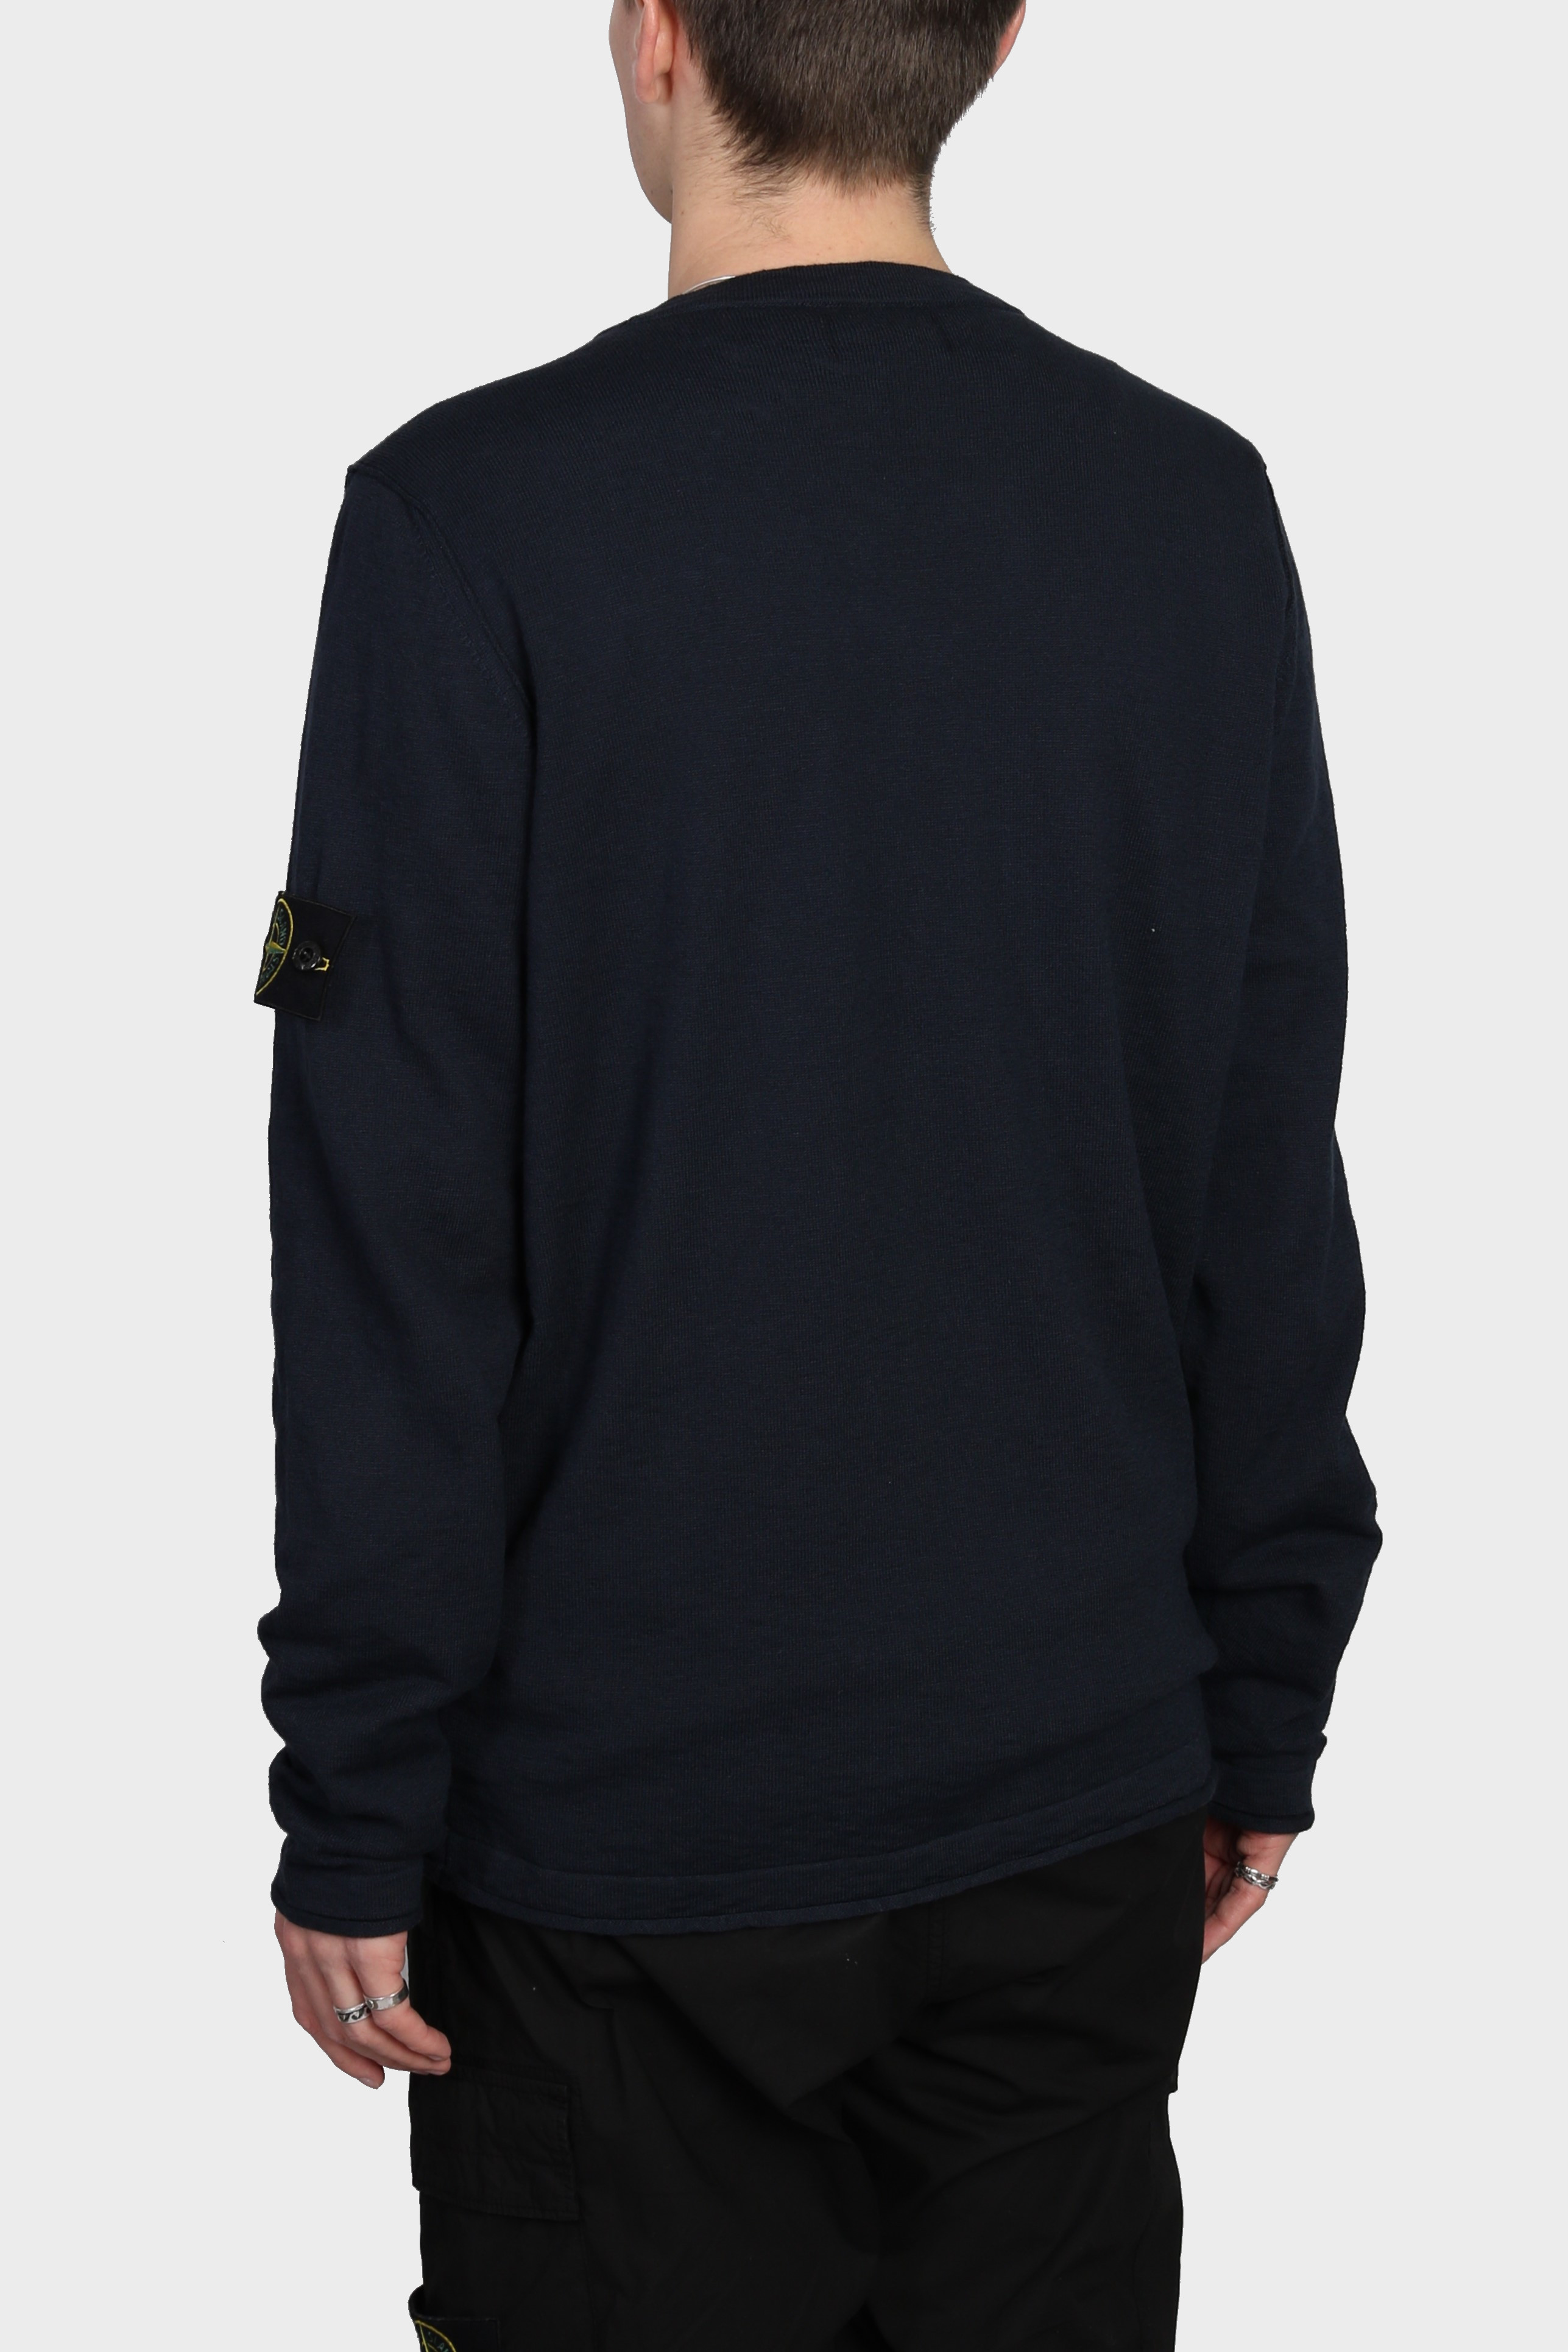 STONE ISLAND Summer Knit Pullover in Navy 3XL